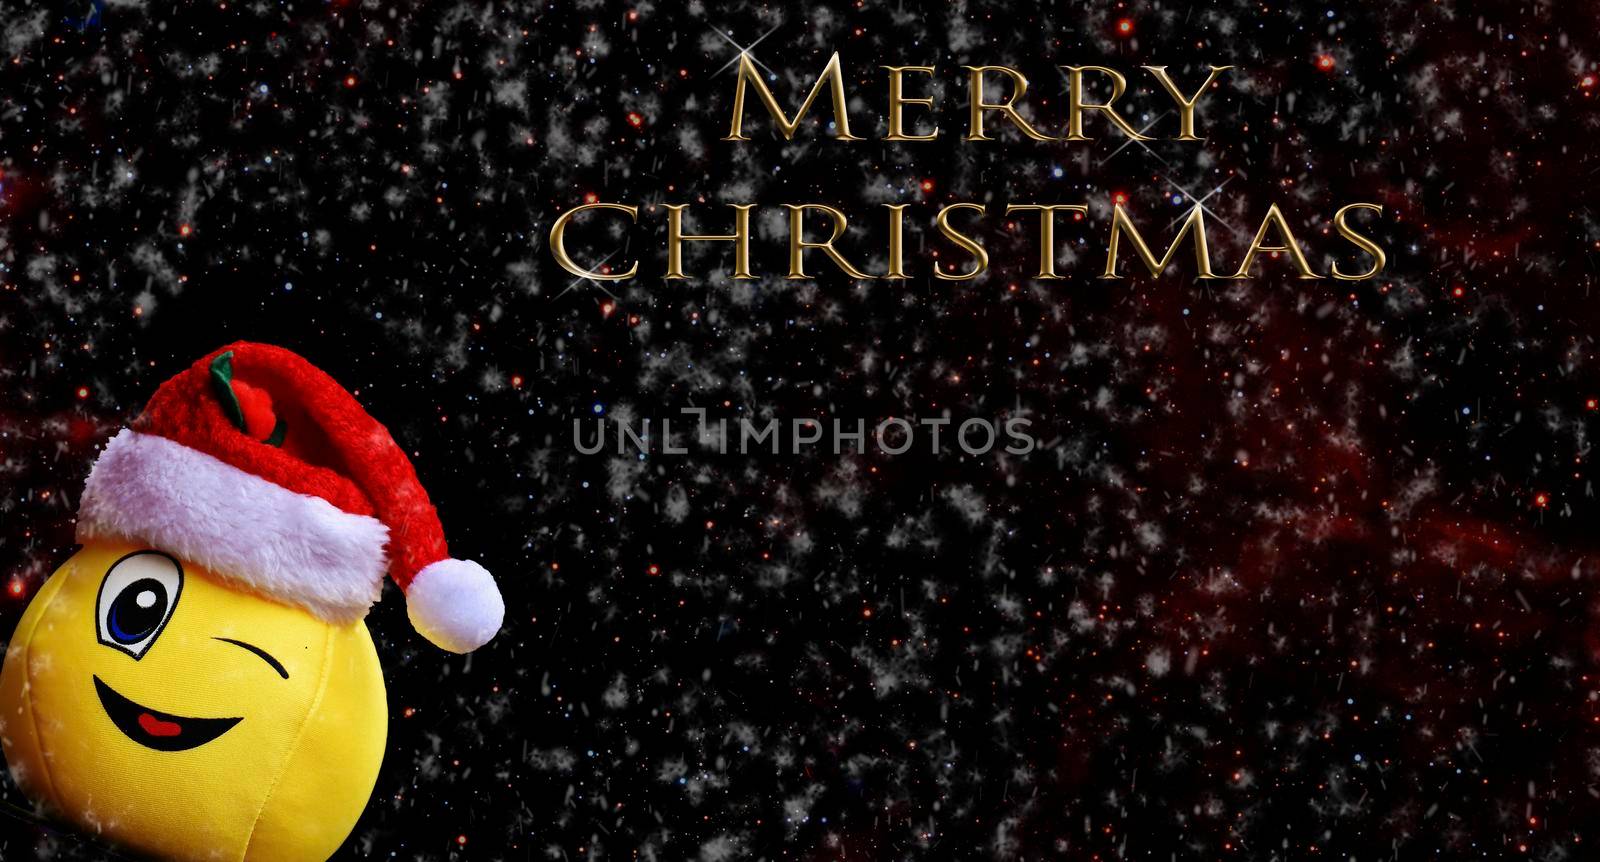 Background with a picture of a cheerful smiley in a red hat to create a holiday card